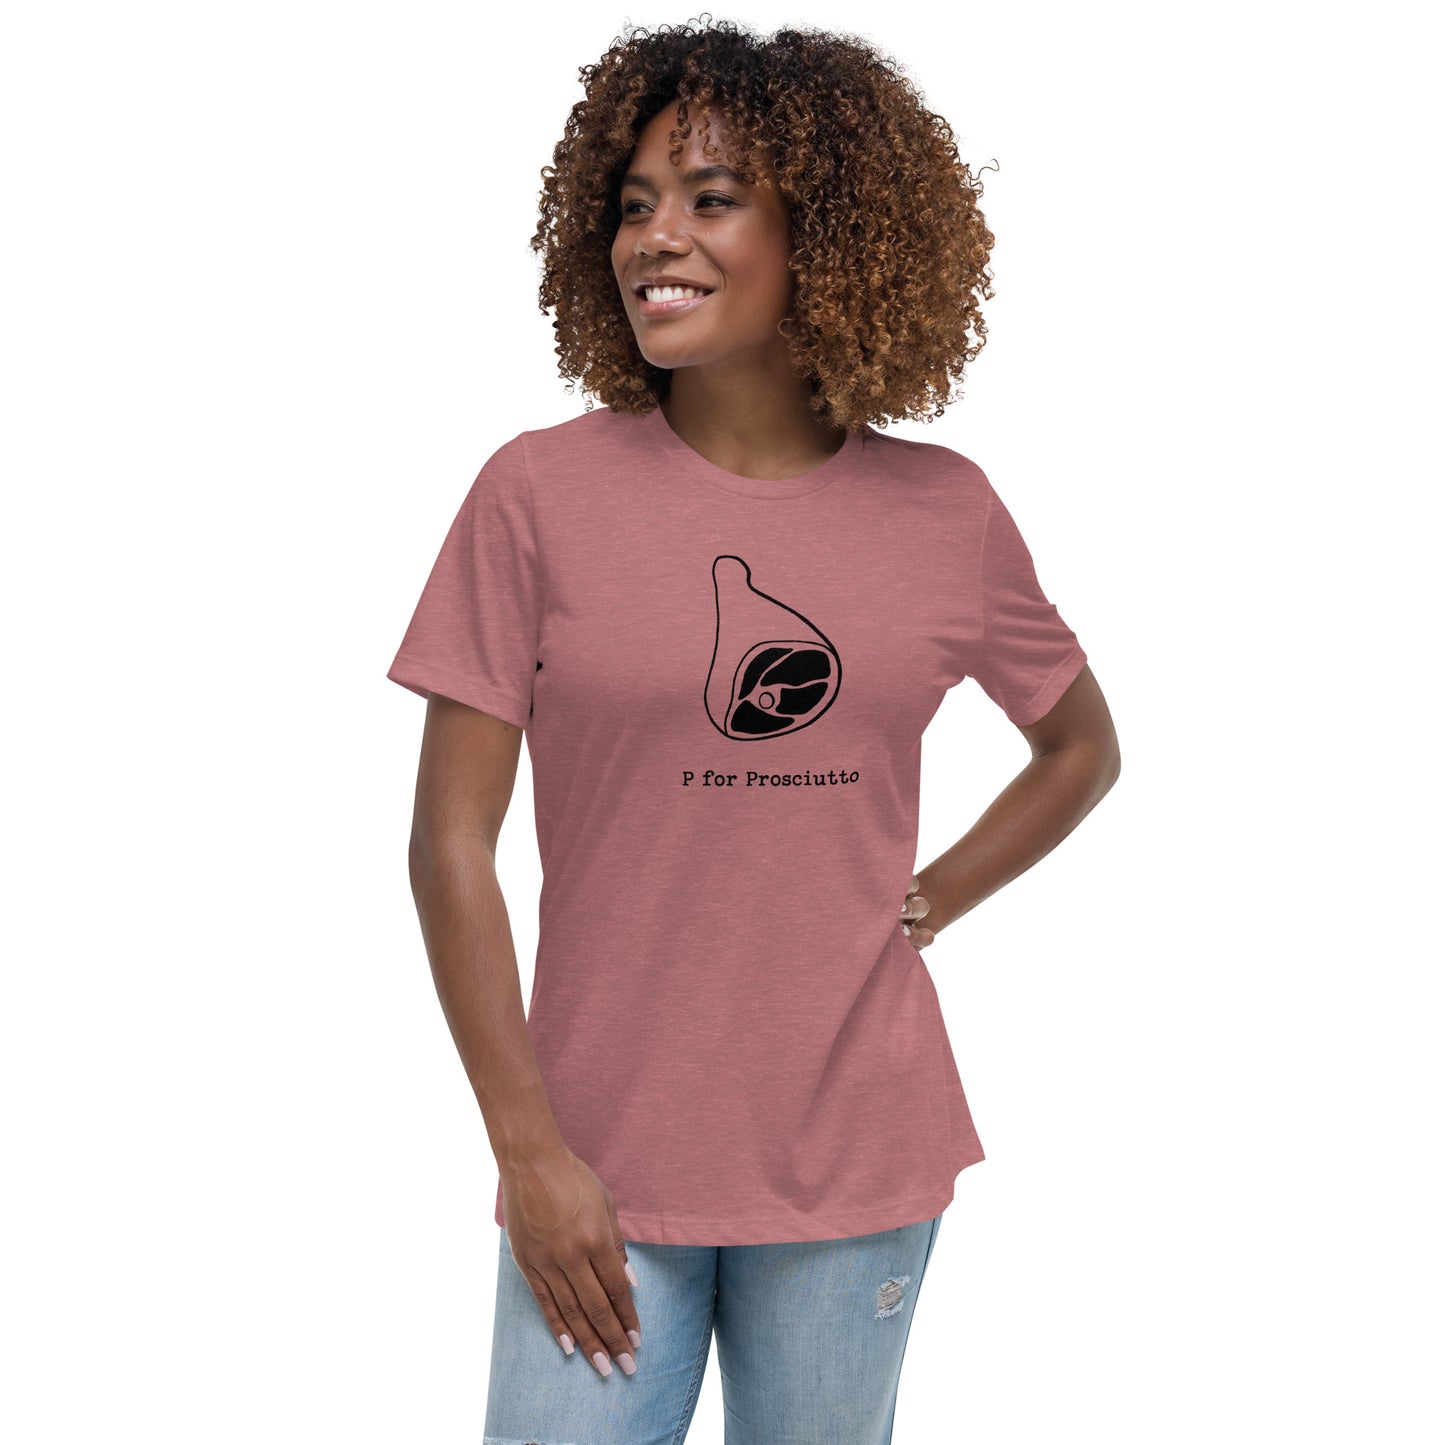 Prosciutto on a Women's Relaxed T-Shirt